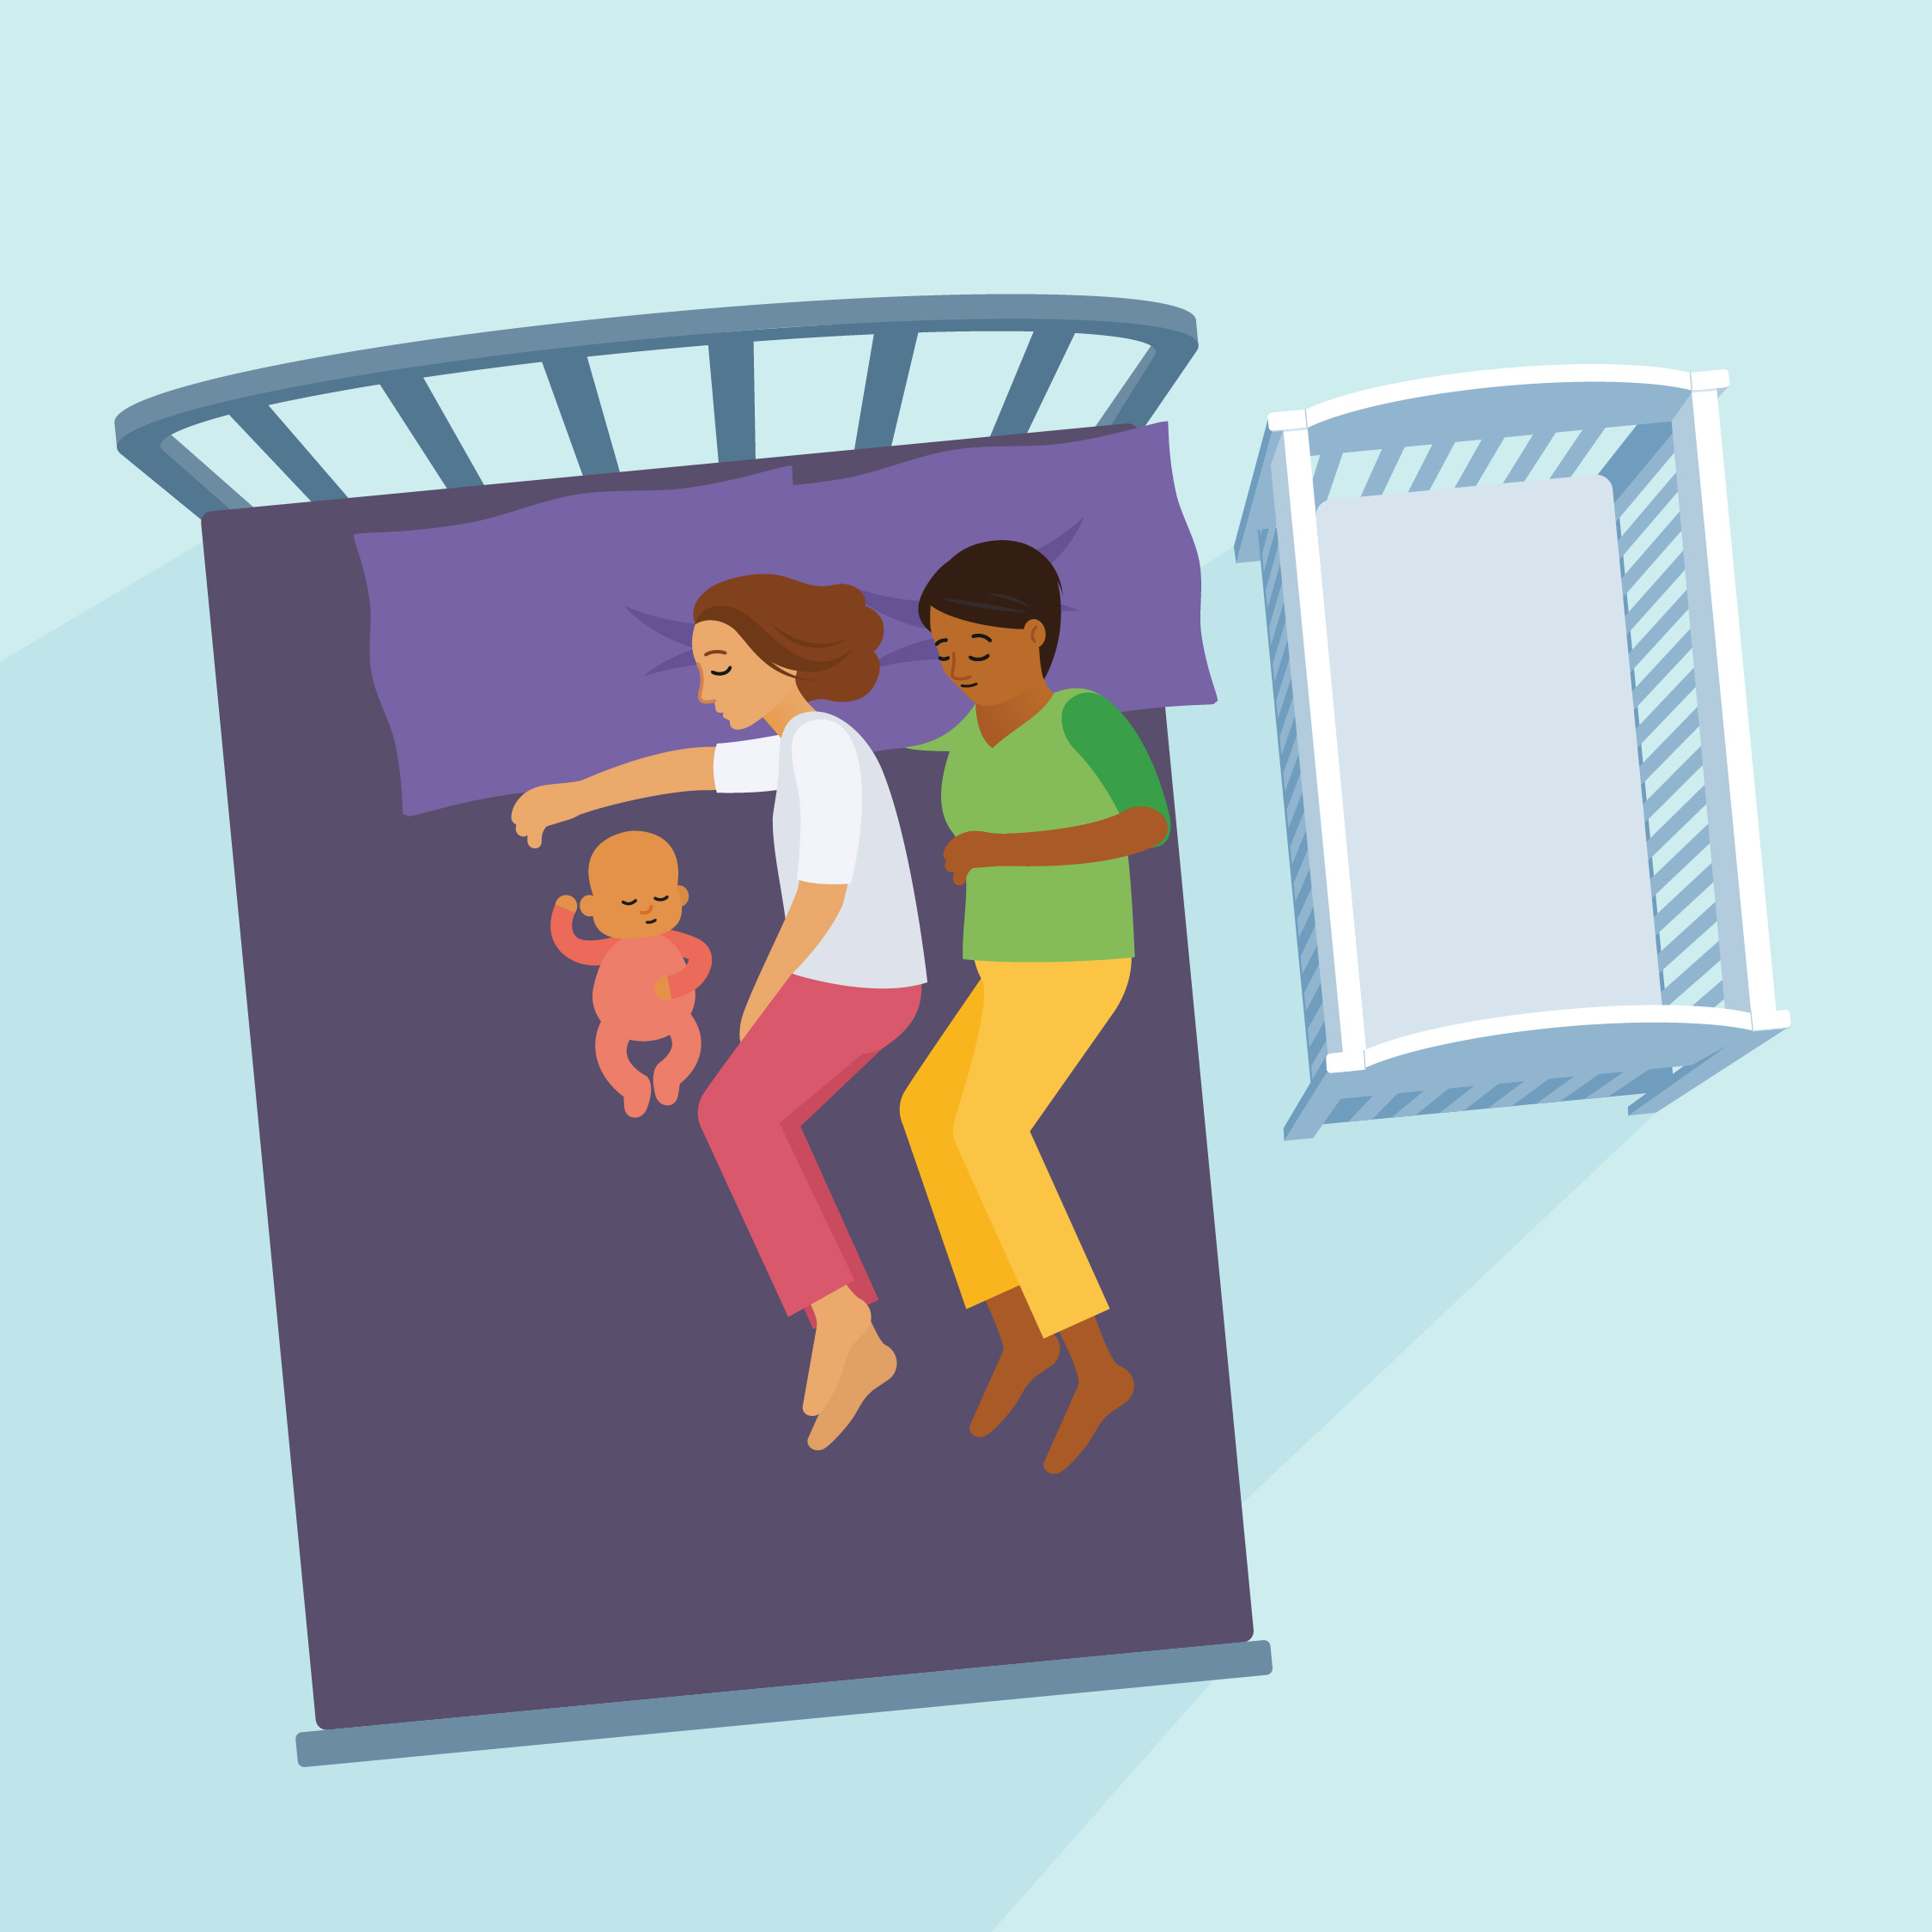 Safer sleep for babies resources - co-sleeping information